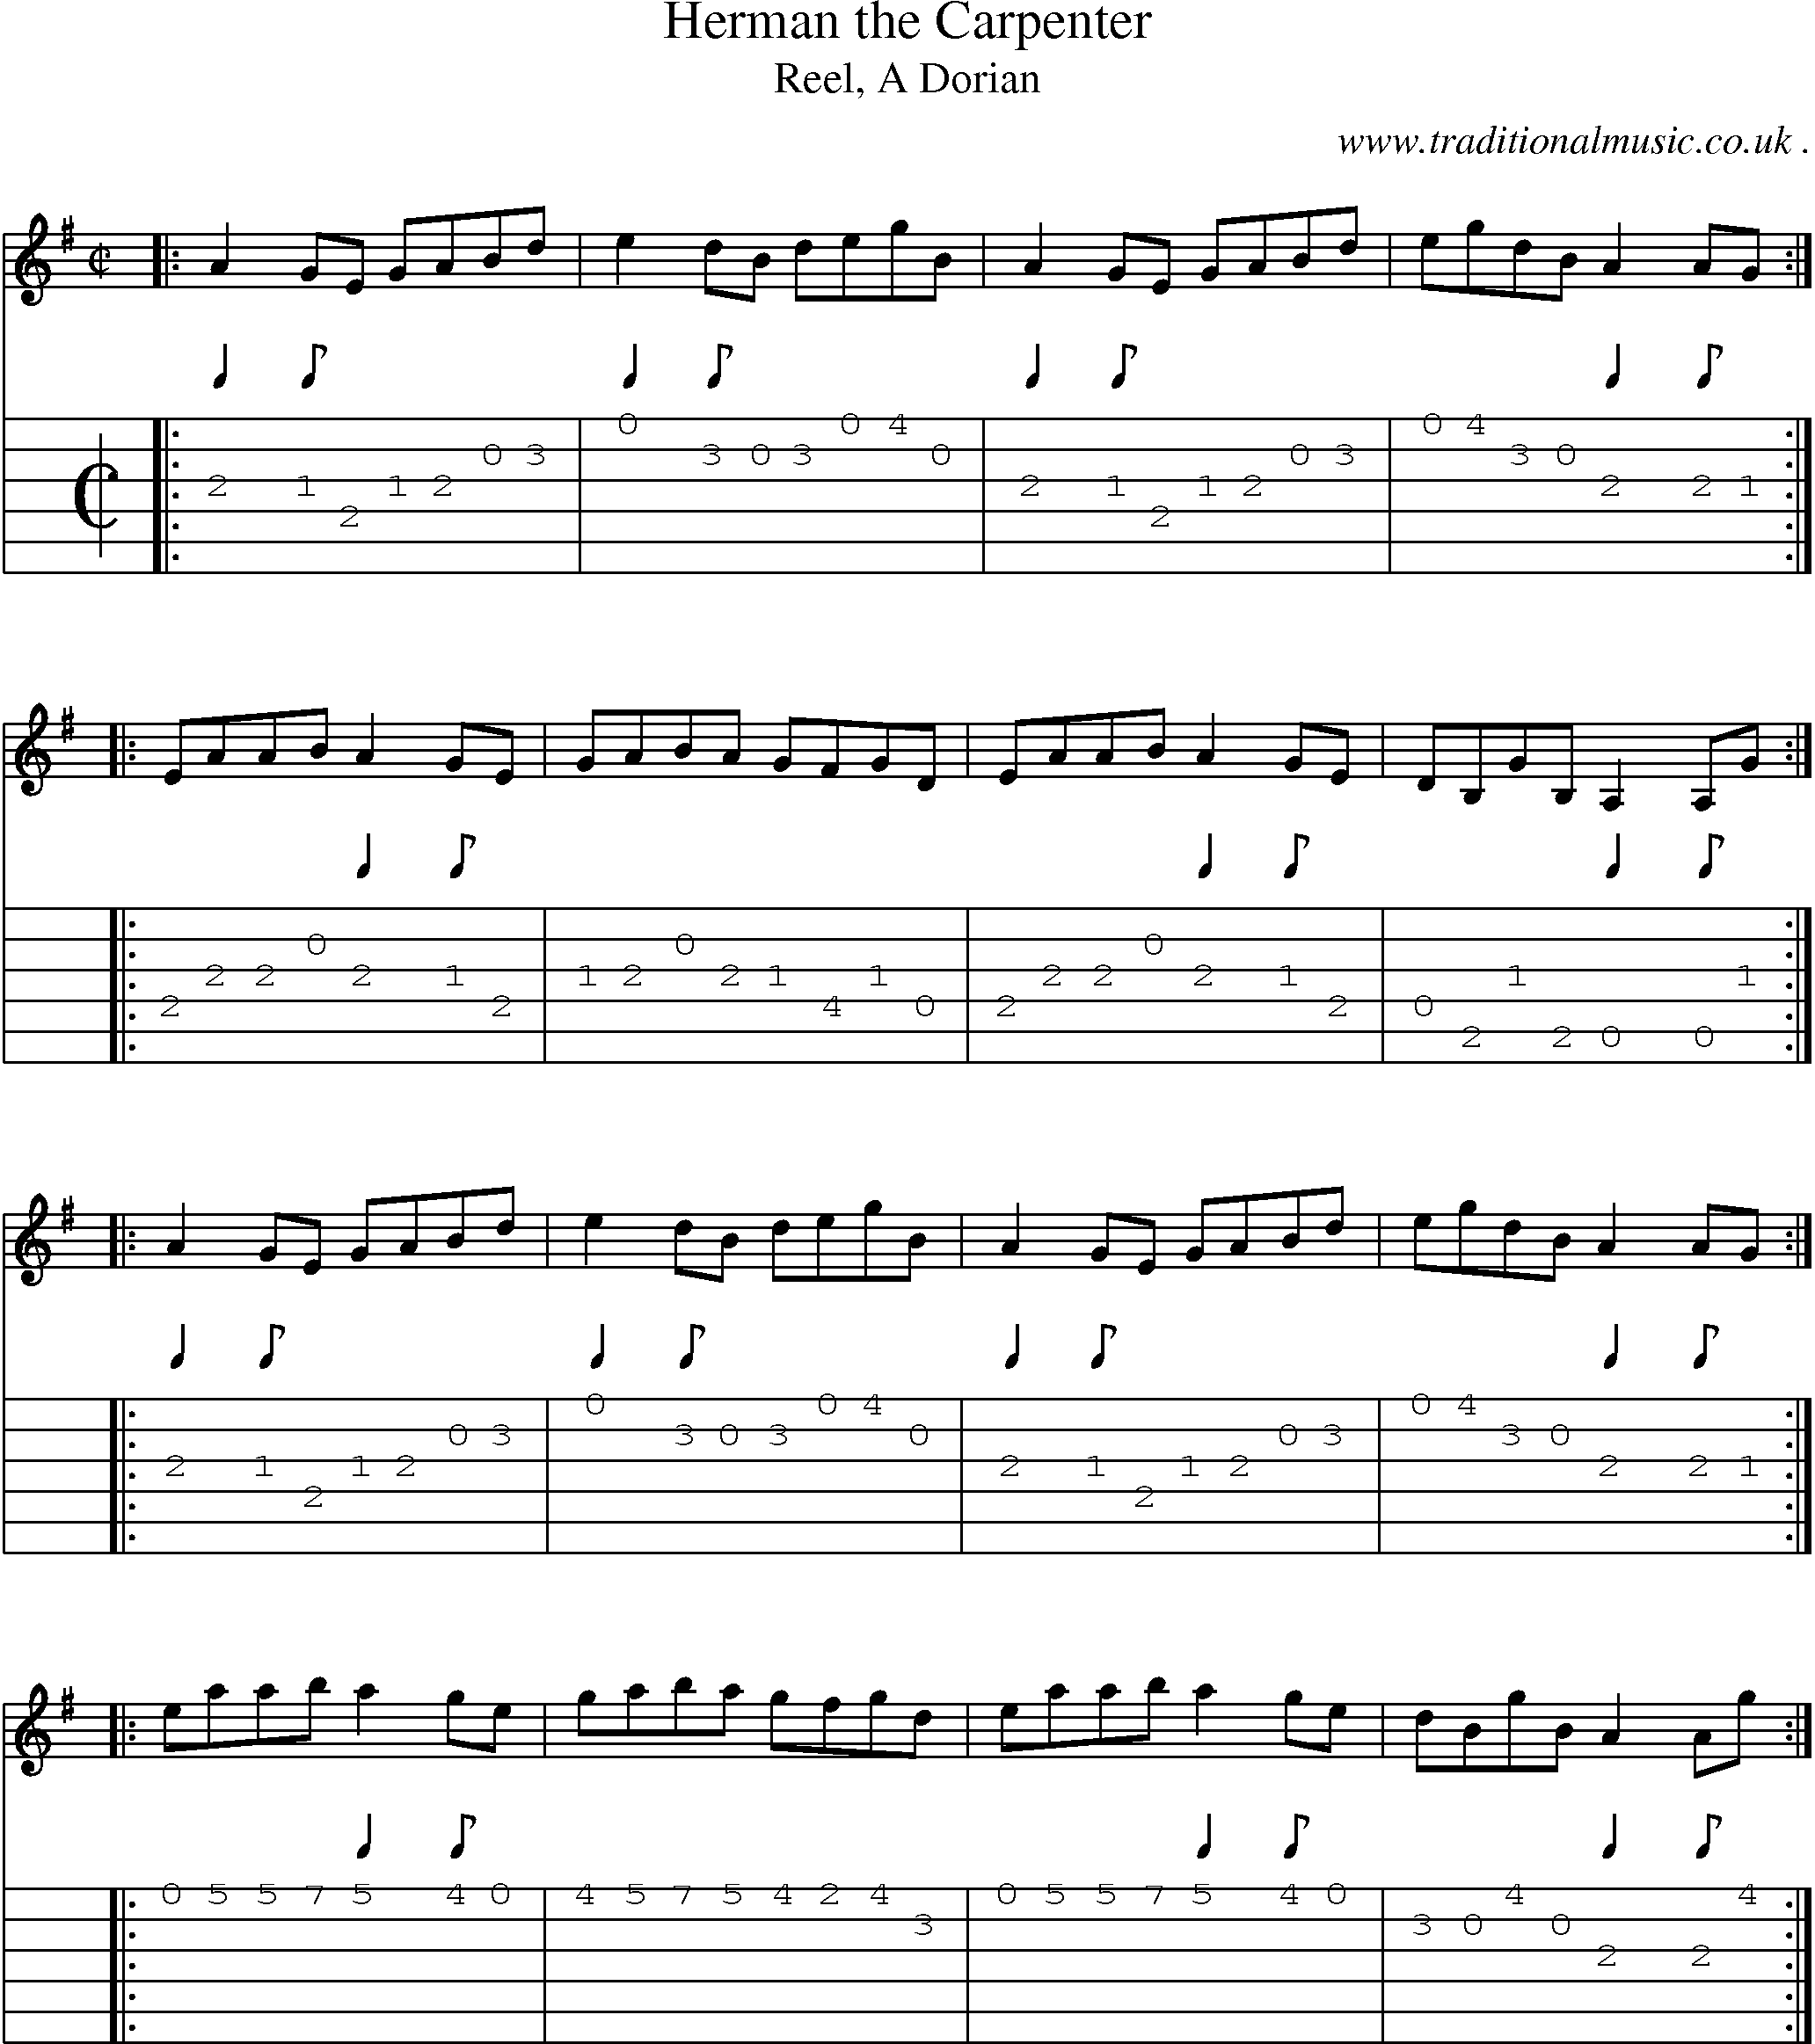 Sheet-music  score, Chords and Guitar Tabs for Herman The Carpenter